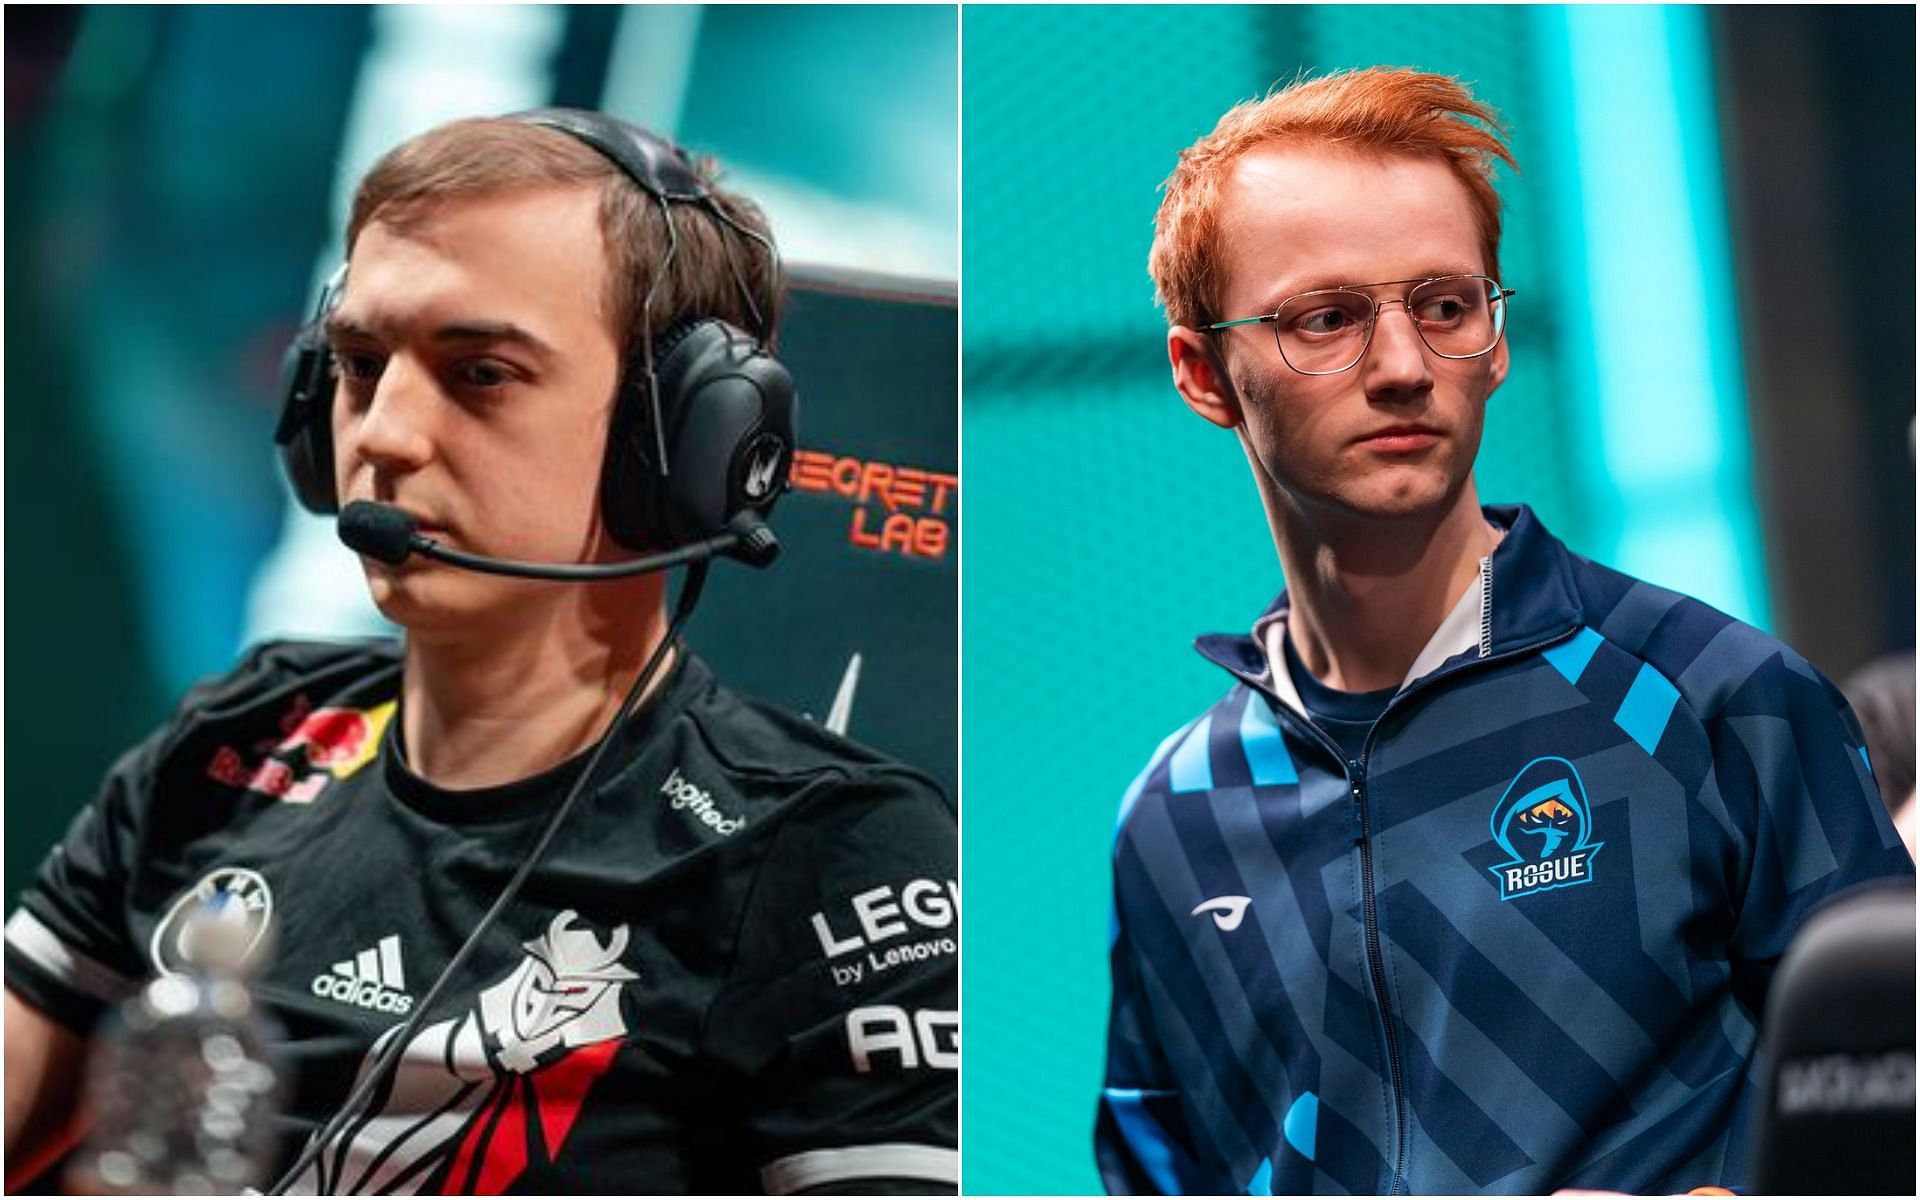 Caps vs. Larssen will be the featured match-up of the day when G2 and Rogue go head-to-head (Image via League of Legends)